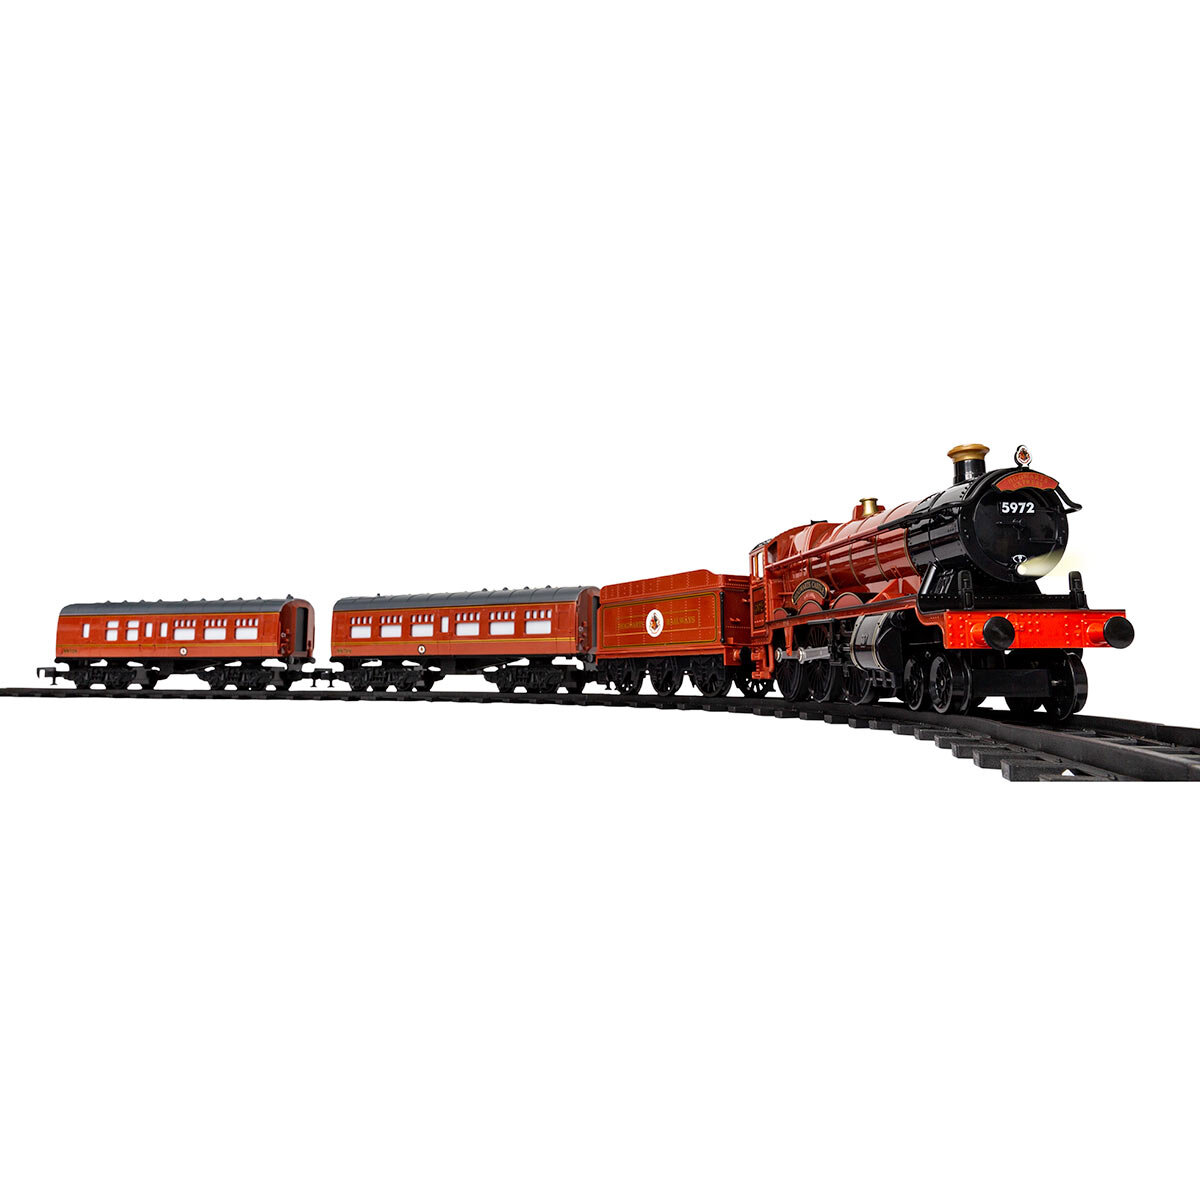 Buy Mickey Mouse Train Set Feature Image at Costco.co.uk